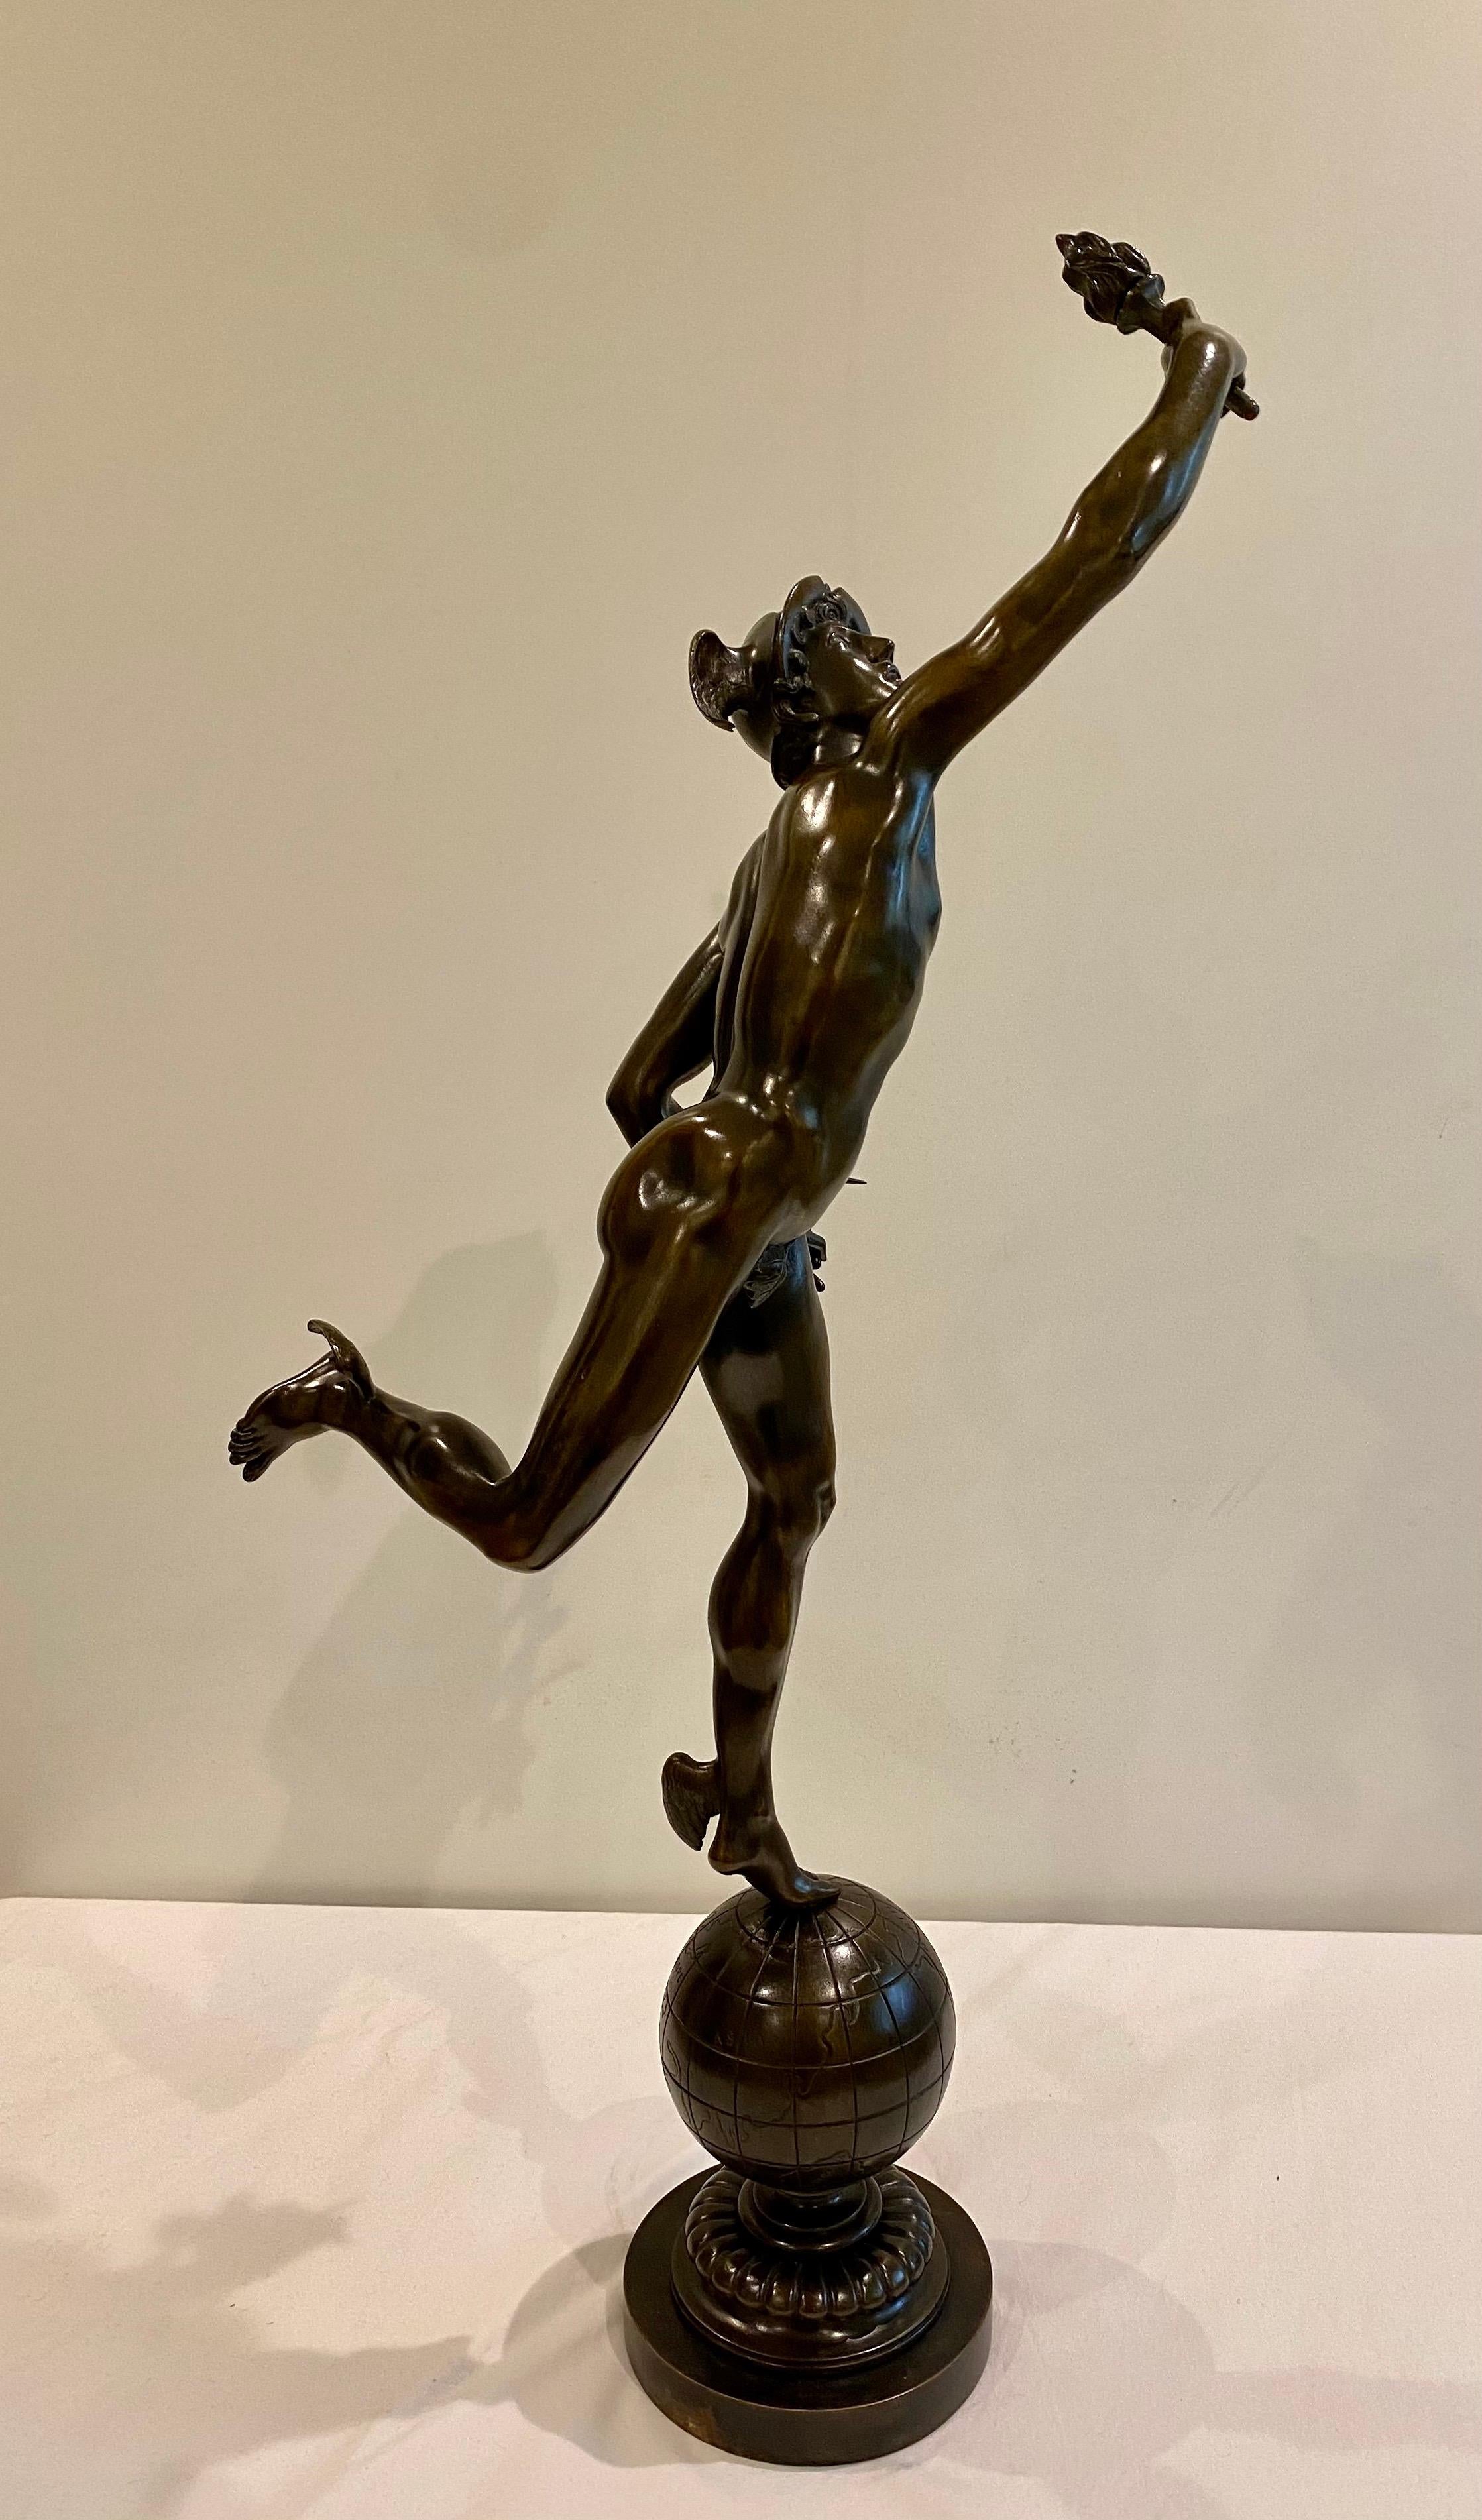 Stunning 19th.c. bronze sculpture of Hermes. Also known as Mercury, the messenger of the gods, guide of the dead and protector of merchants, shepherds, gamblers, liars, and thieves. Set on a Base in the form of an Atlas, whilst holding the caduceus